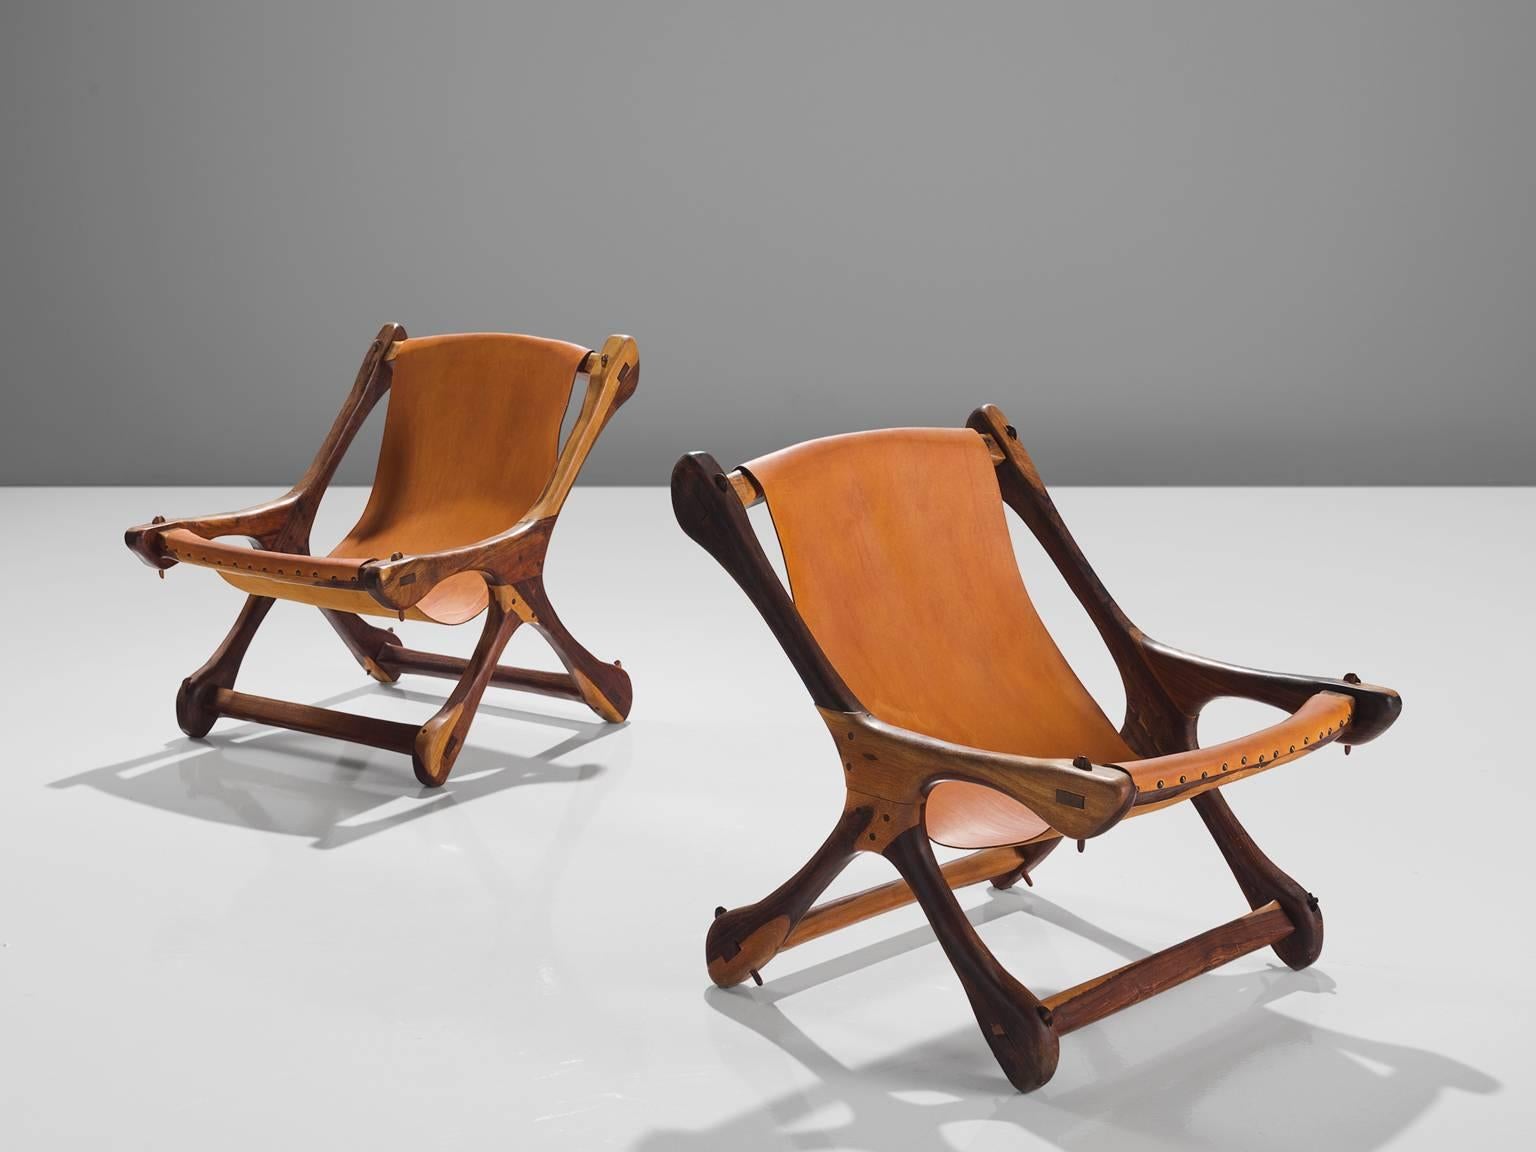 Don S. Shoemaker for Señal Furniture, set of two armchairs, in cocobolo and cognac leather, Mexico 1960s. 

Iconic pair of two swinger lounge chairs in Cocobolo rosewood and leather. These sling chairs have a characteristic organic shaped bone